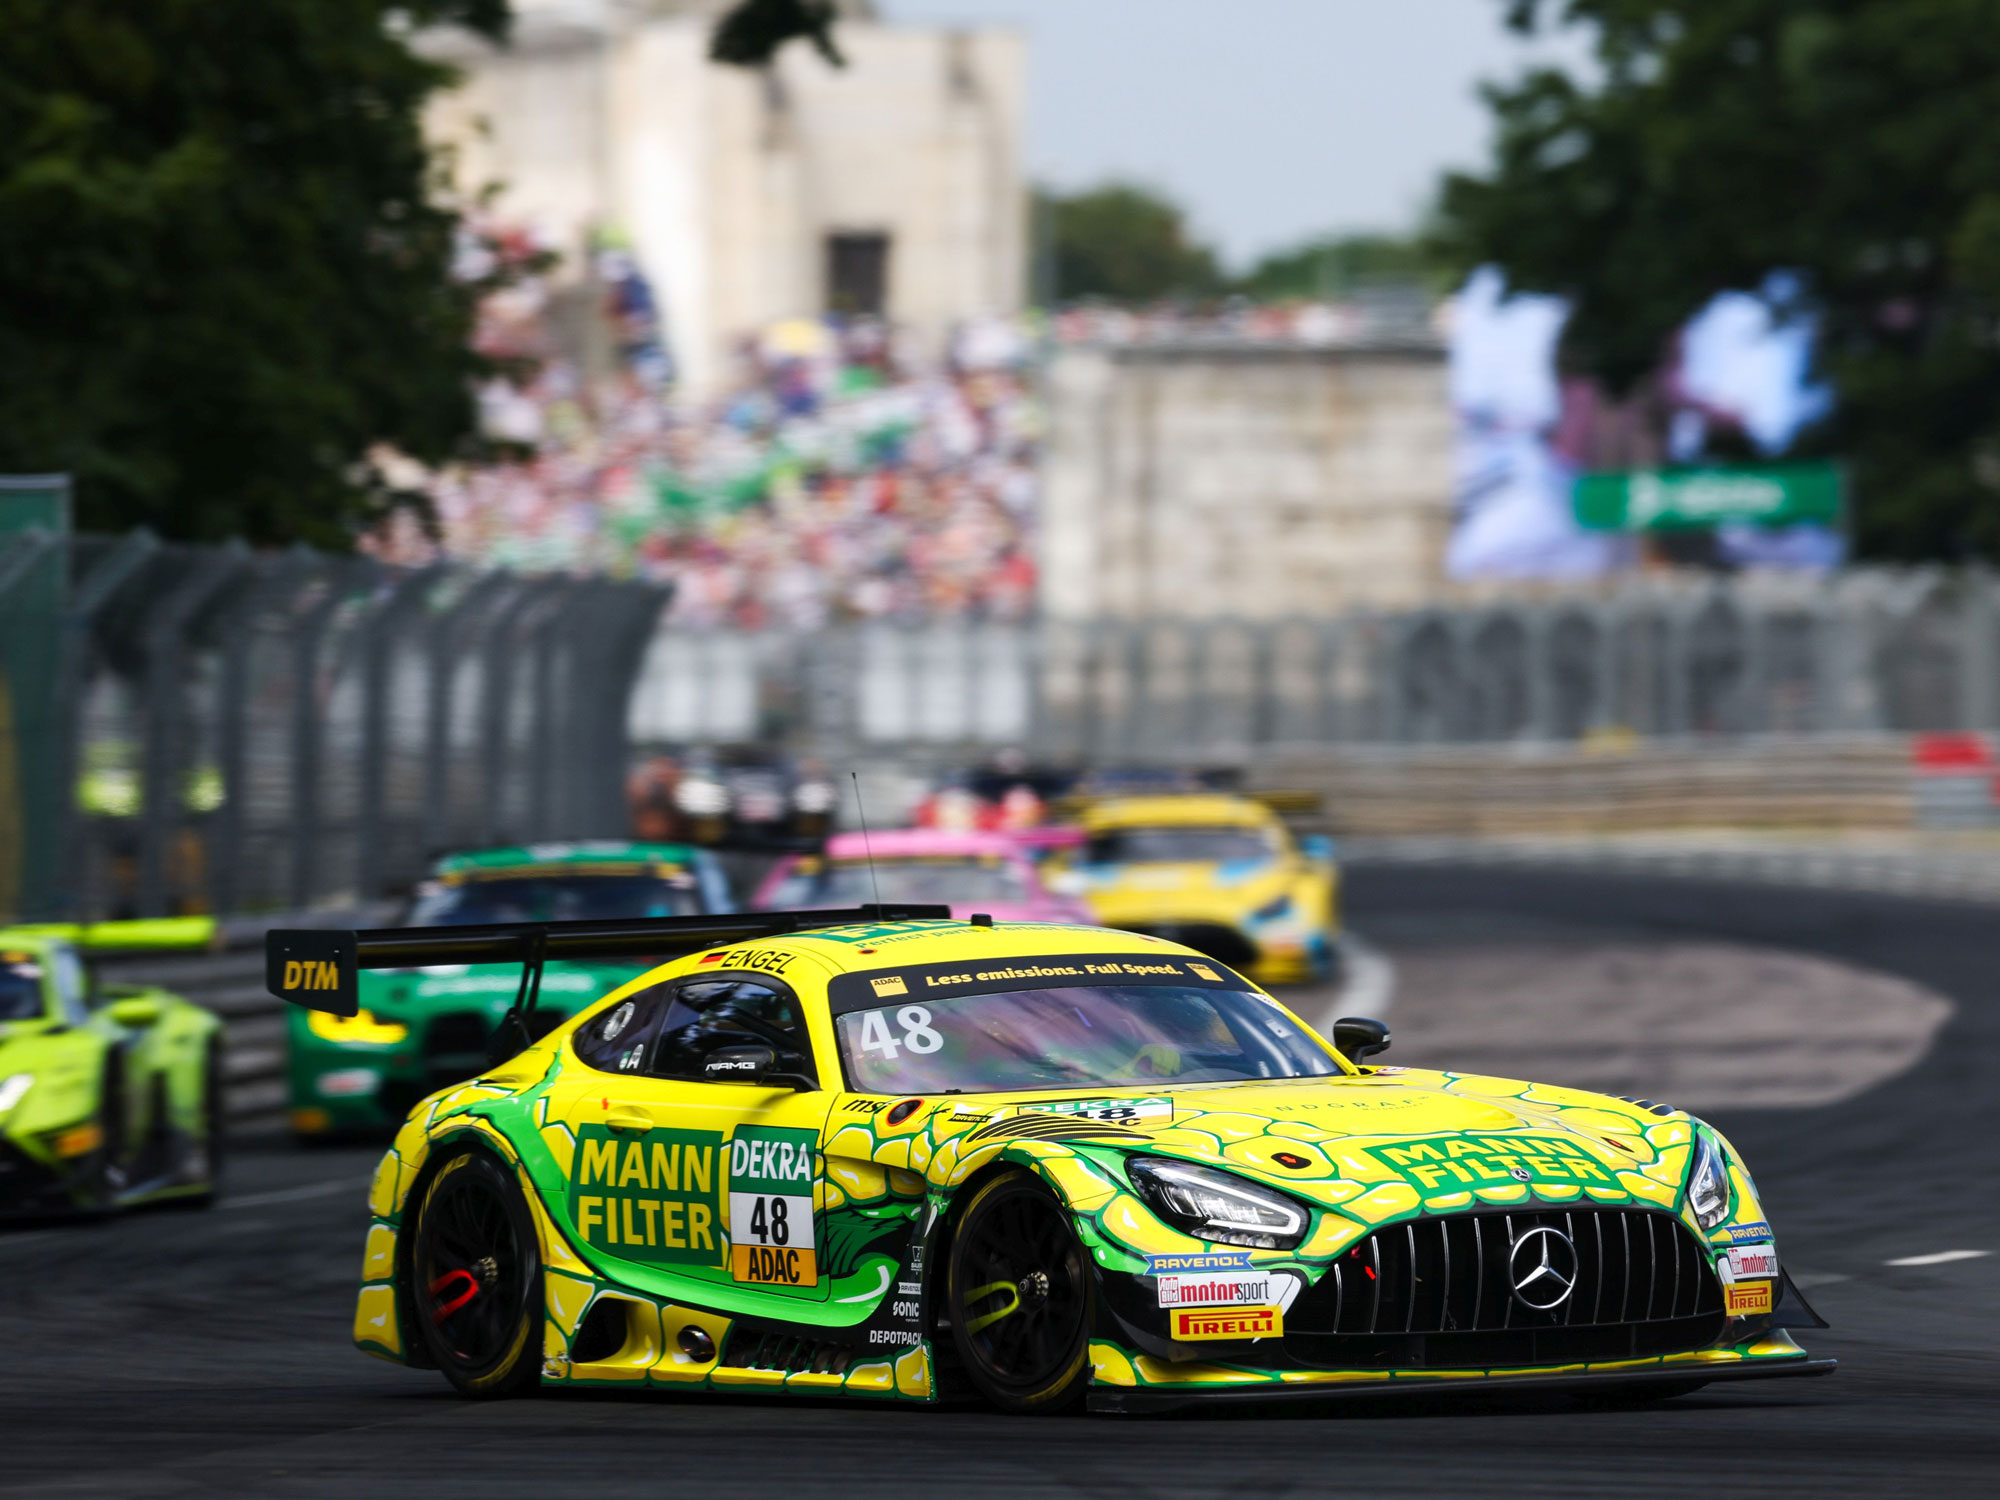 Two top ten finishes for the MANN-FILTER Mamba at Norisring